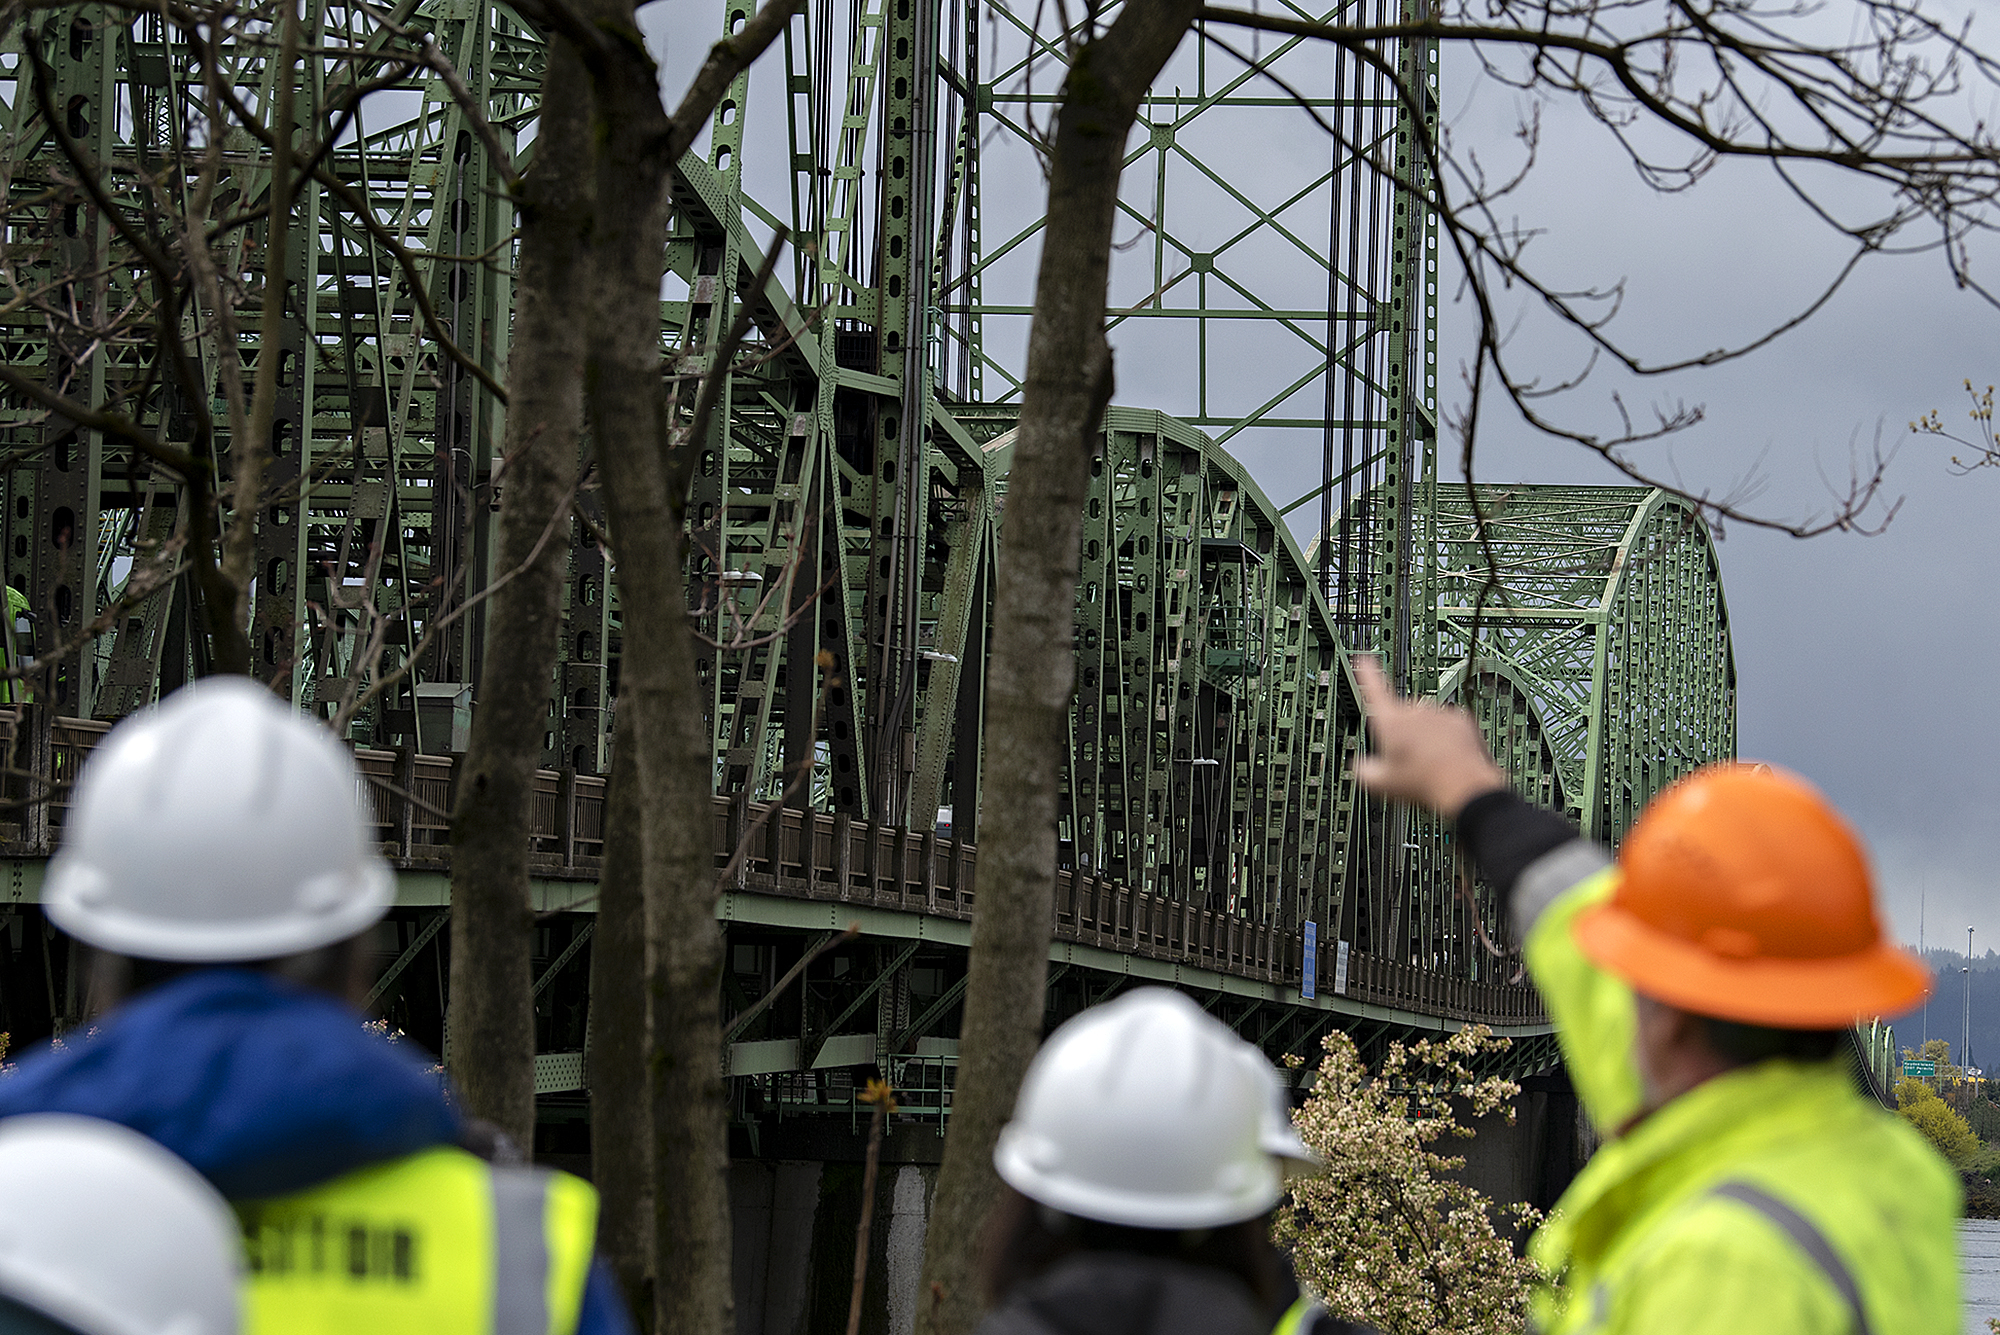 U.S. Senator Maria Cantwell tours the Interstate Bridge on Wednesday morning, April 13, 2022. Sen. Cantwell discussed the national infrastructure investments that could help fund a replacement bridge during the visit.